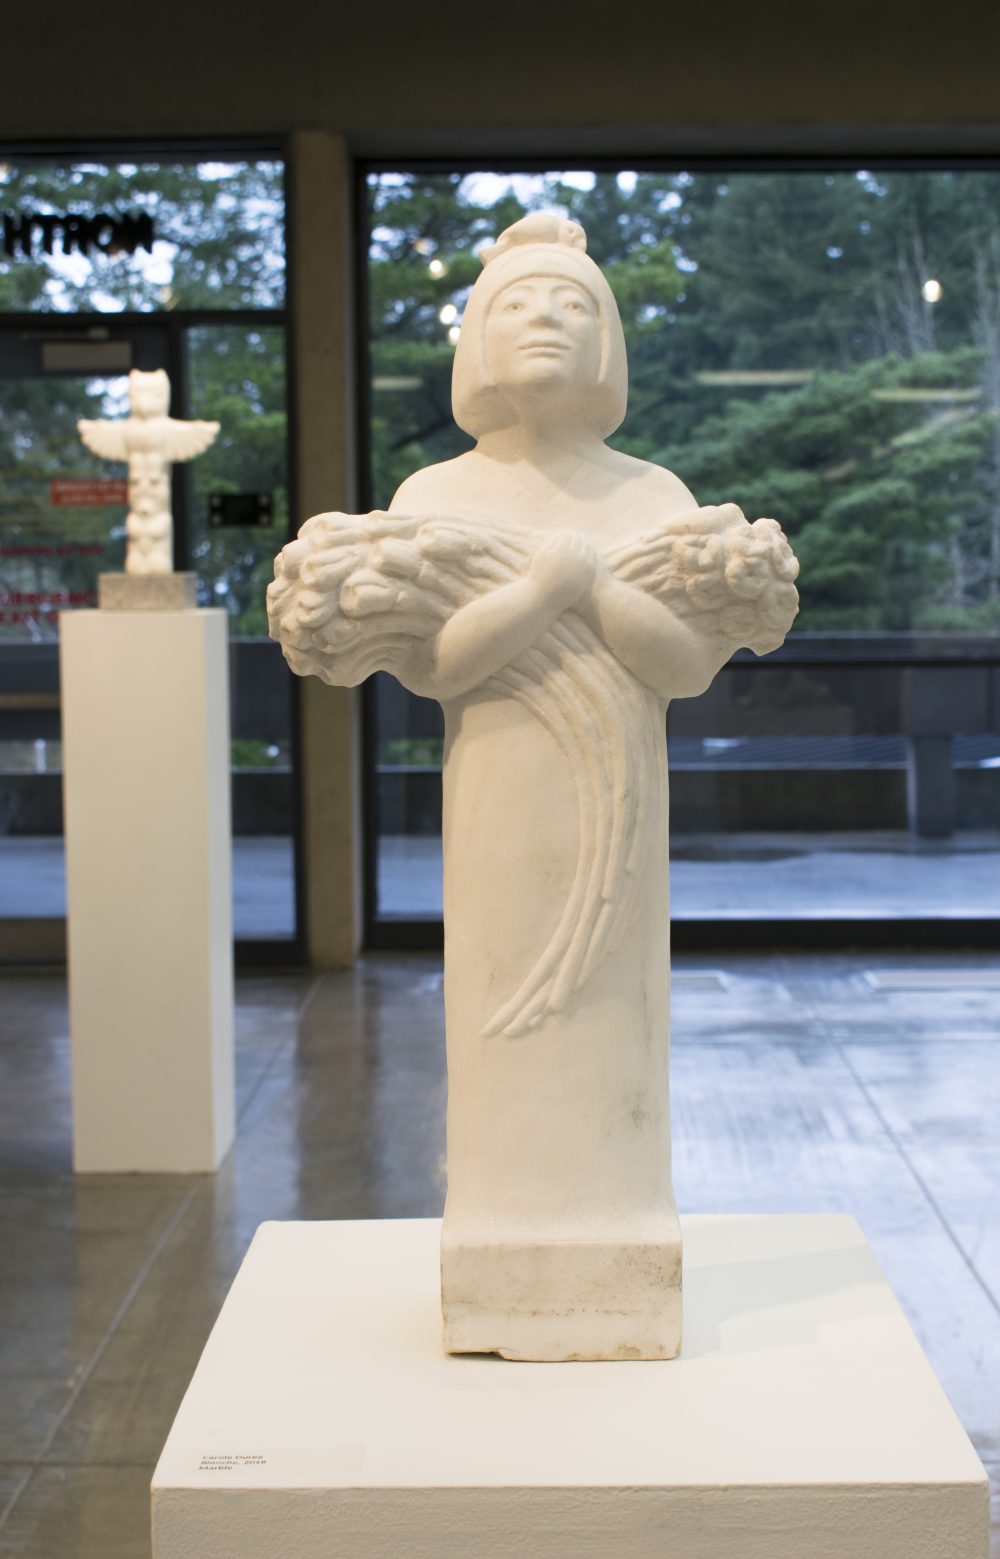 Marble sculpture of woman standing and holding flowers in arms that are across her chest. This sculpture is on a pedestal, in the background is another sculpture on a pedestal.